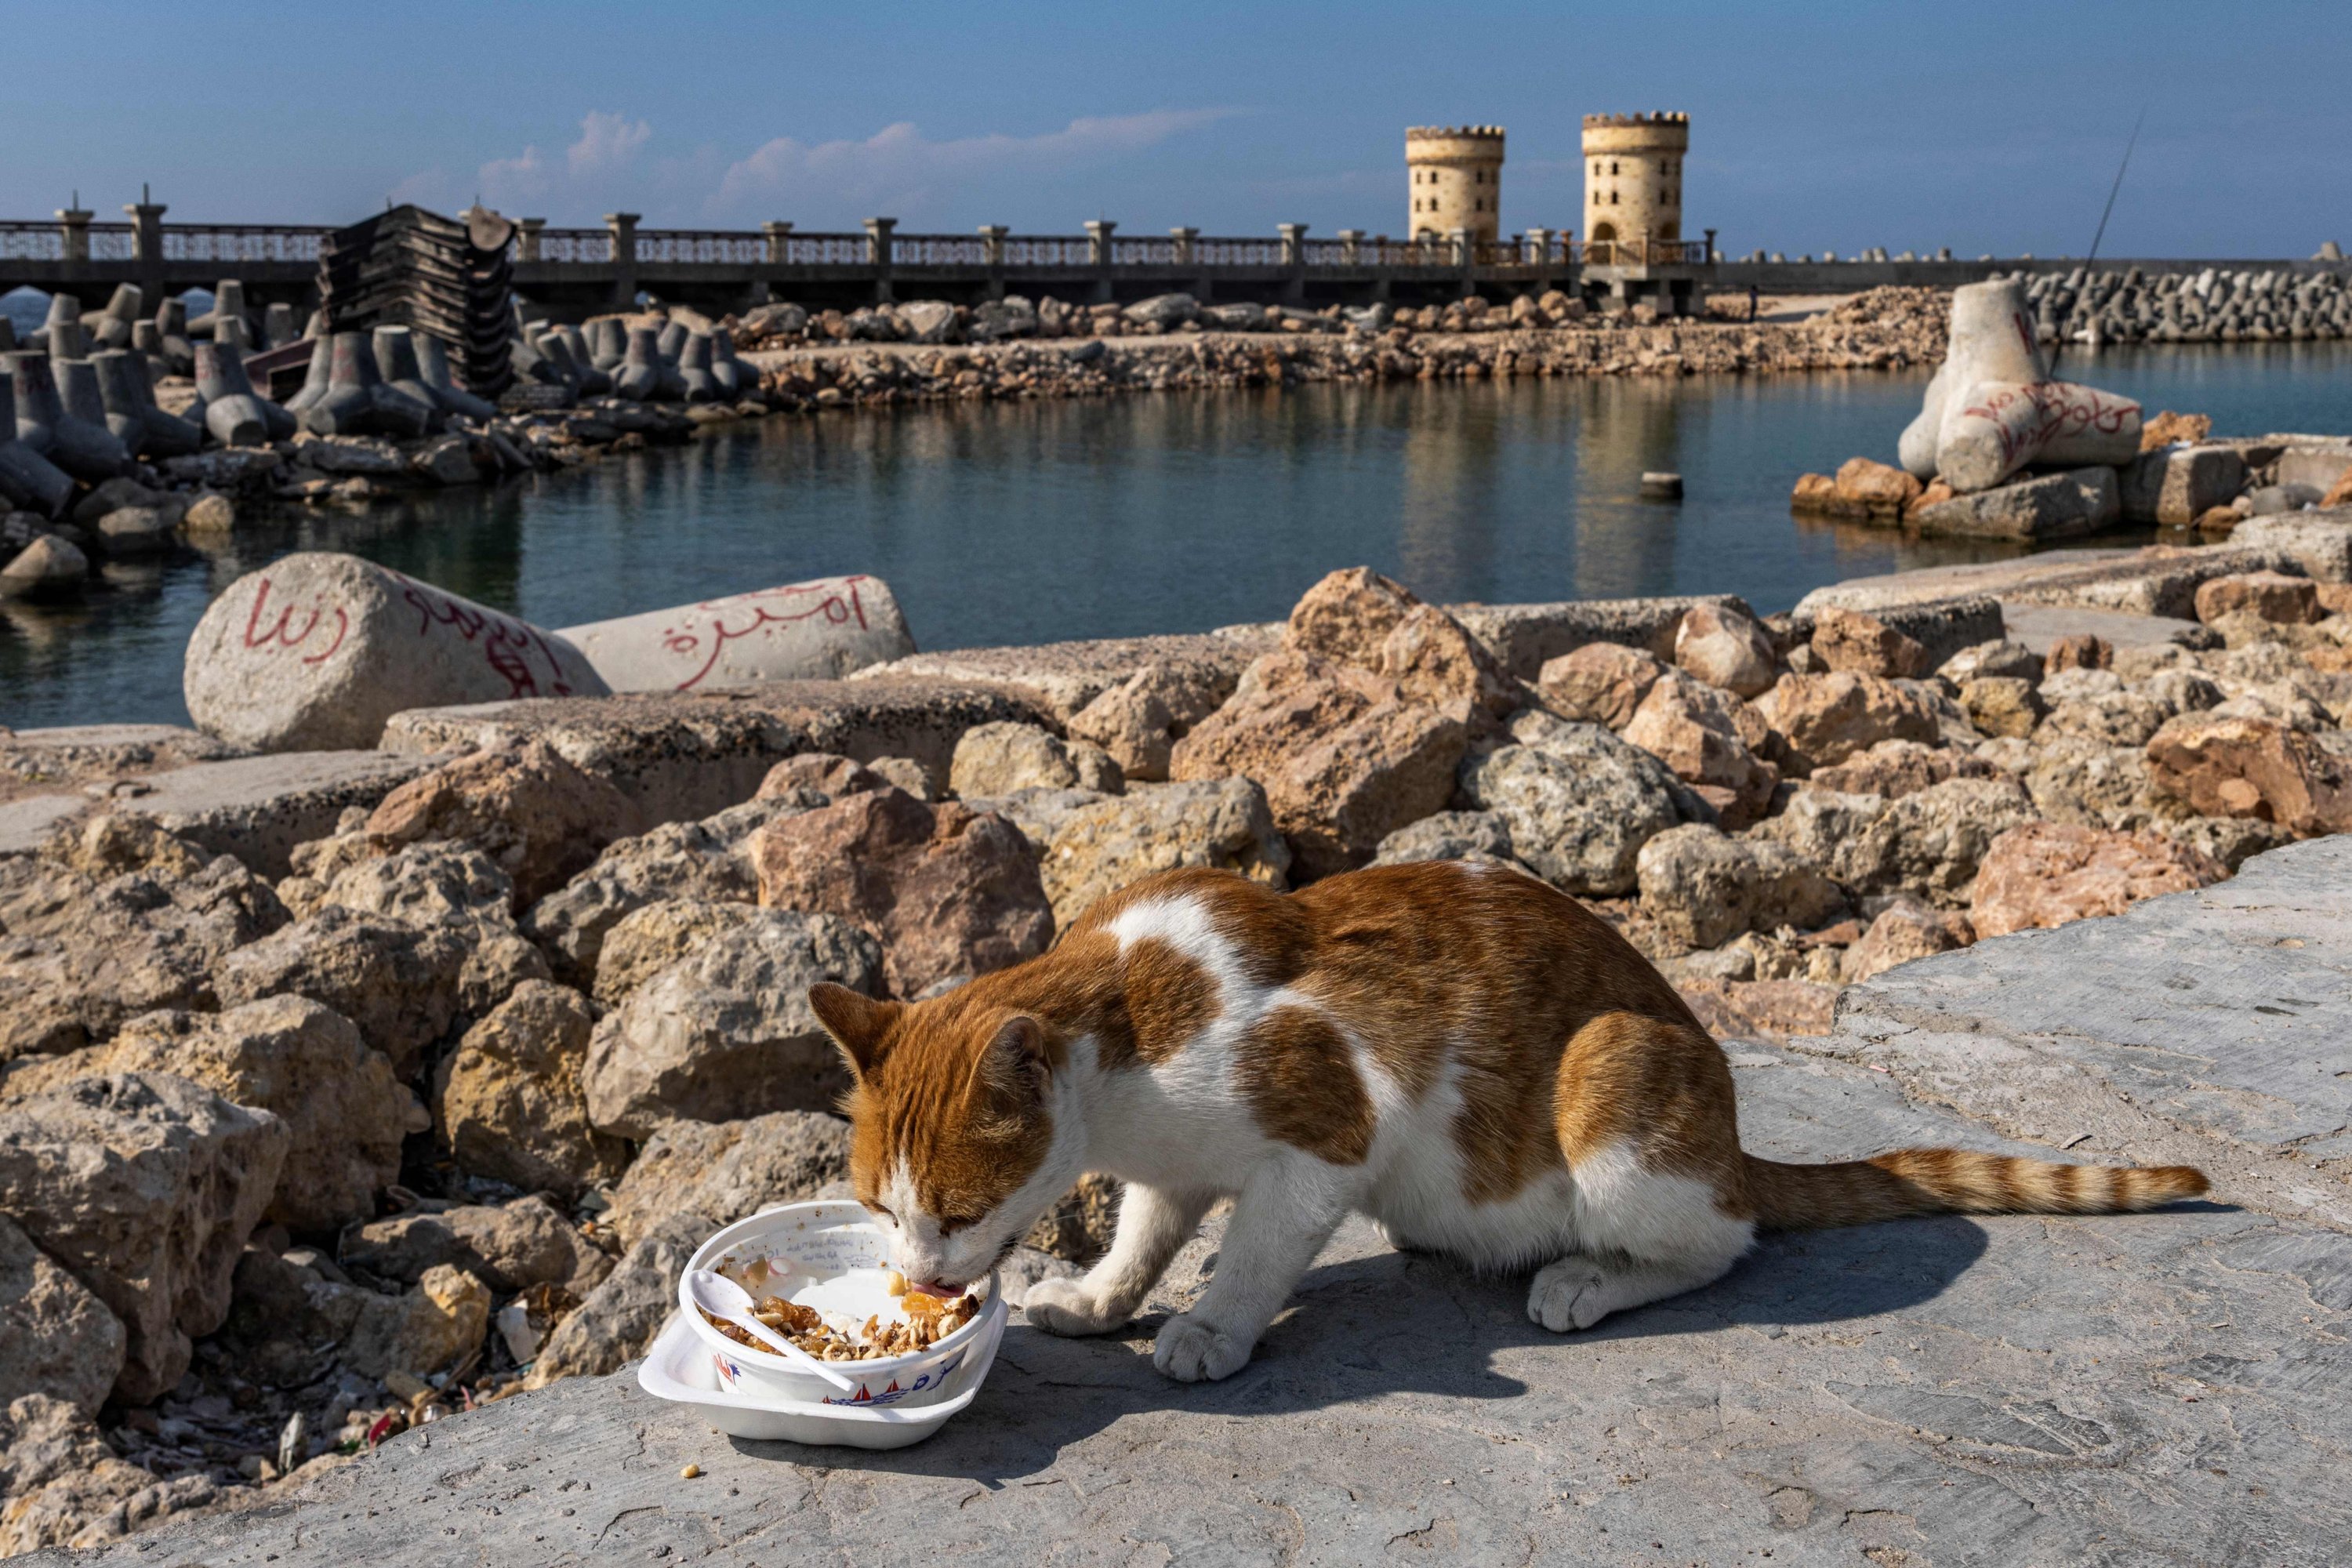 A cat eats leftover rice pudding from a plastic bowl near the concrete blocks installed along the waterfront to break the Mediterranean sea waves off the harbor, in Alexandria, Egypt, Oct. 31, 2022. (AFP Photo)